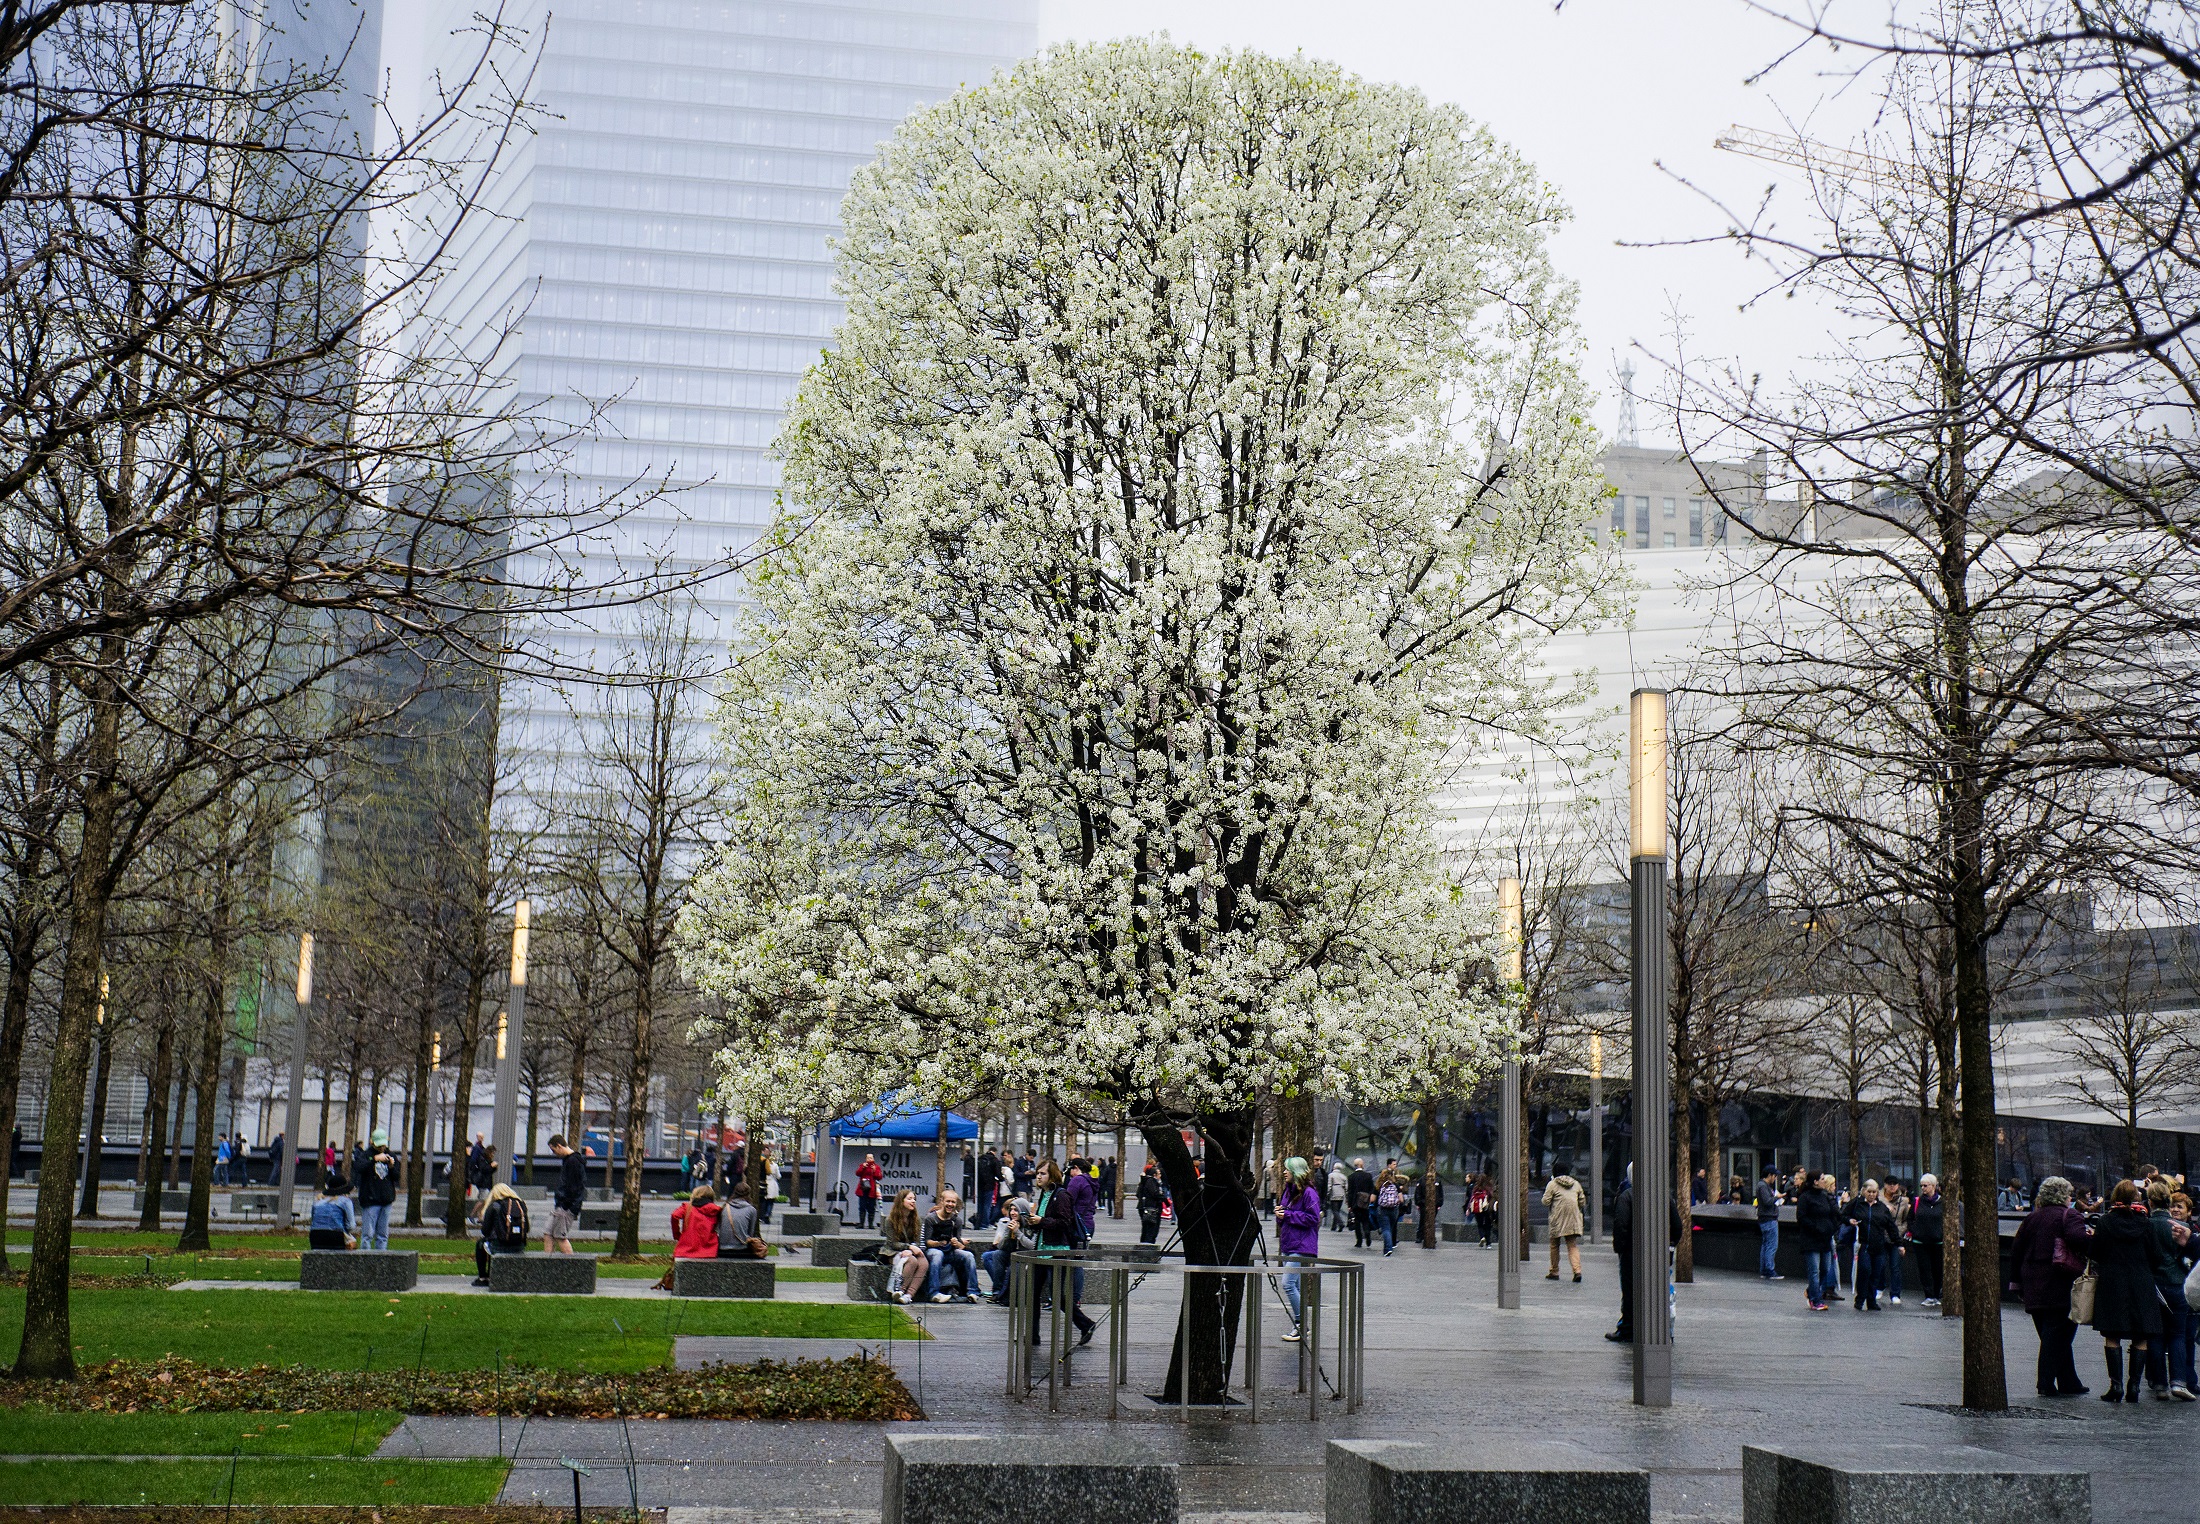 The Survivor Tree blooms on 9/11 Memorial Plaza, its white flowers contrasting with the leafless swamp white oaks surrounding it.